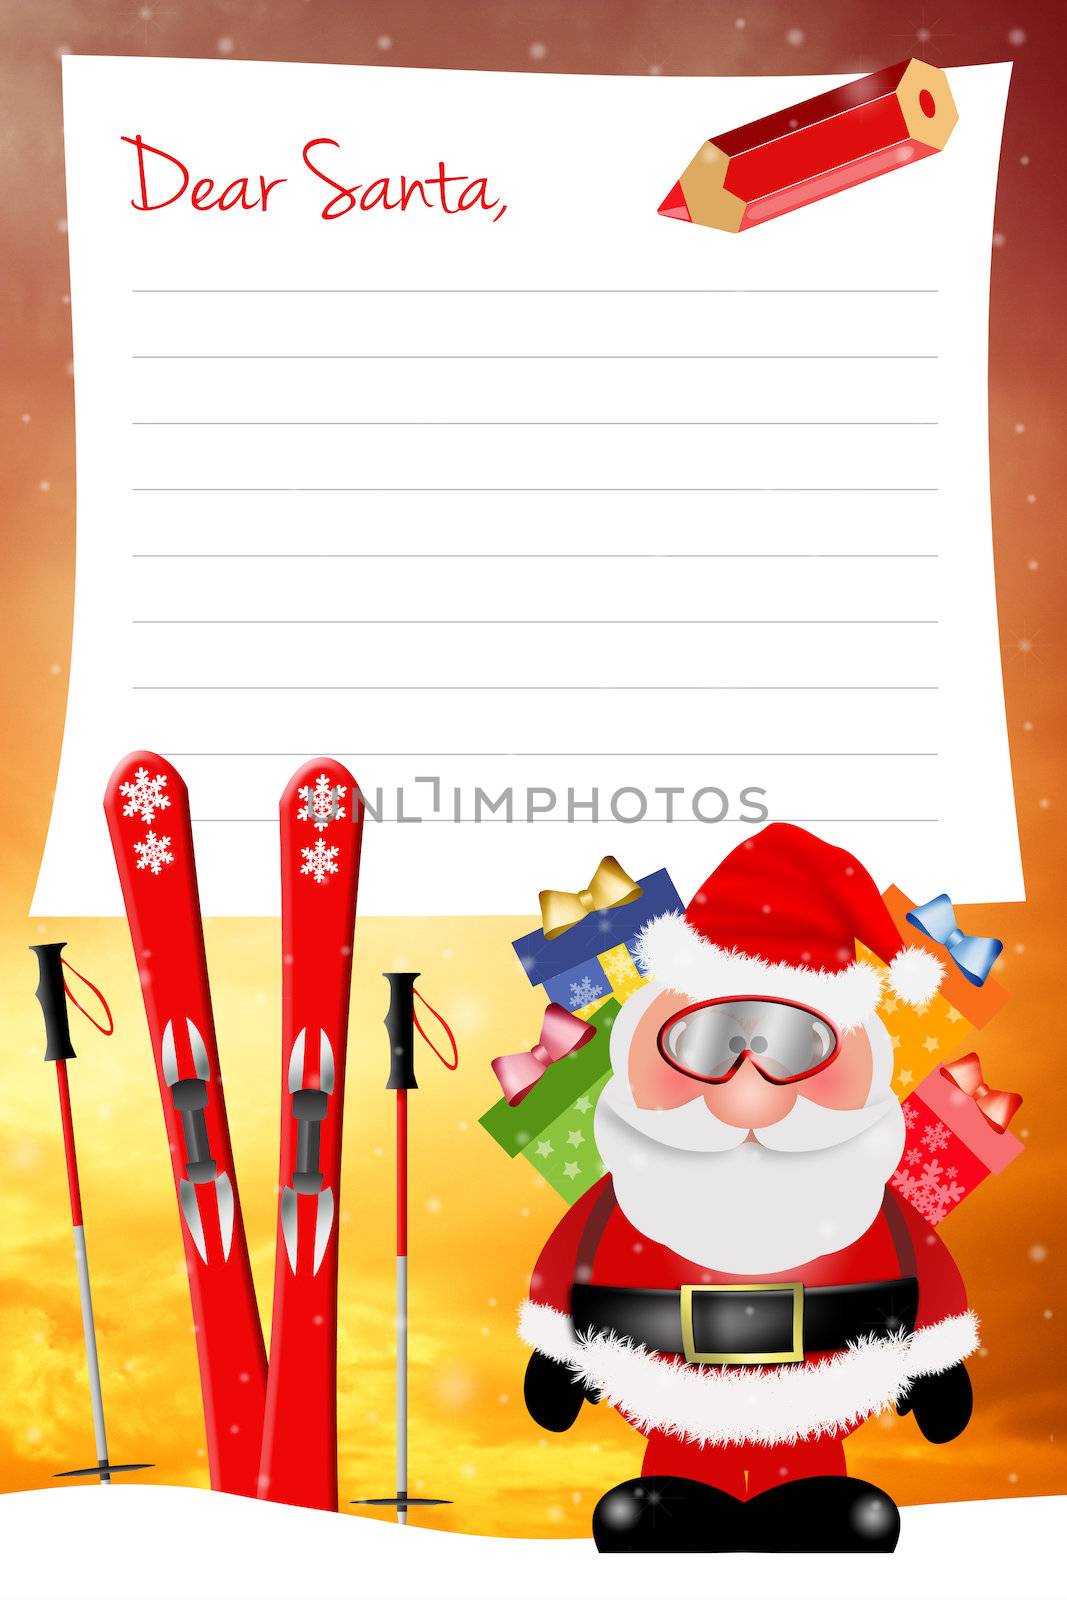 Letters to Santa for Christmas